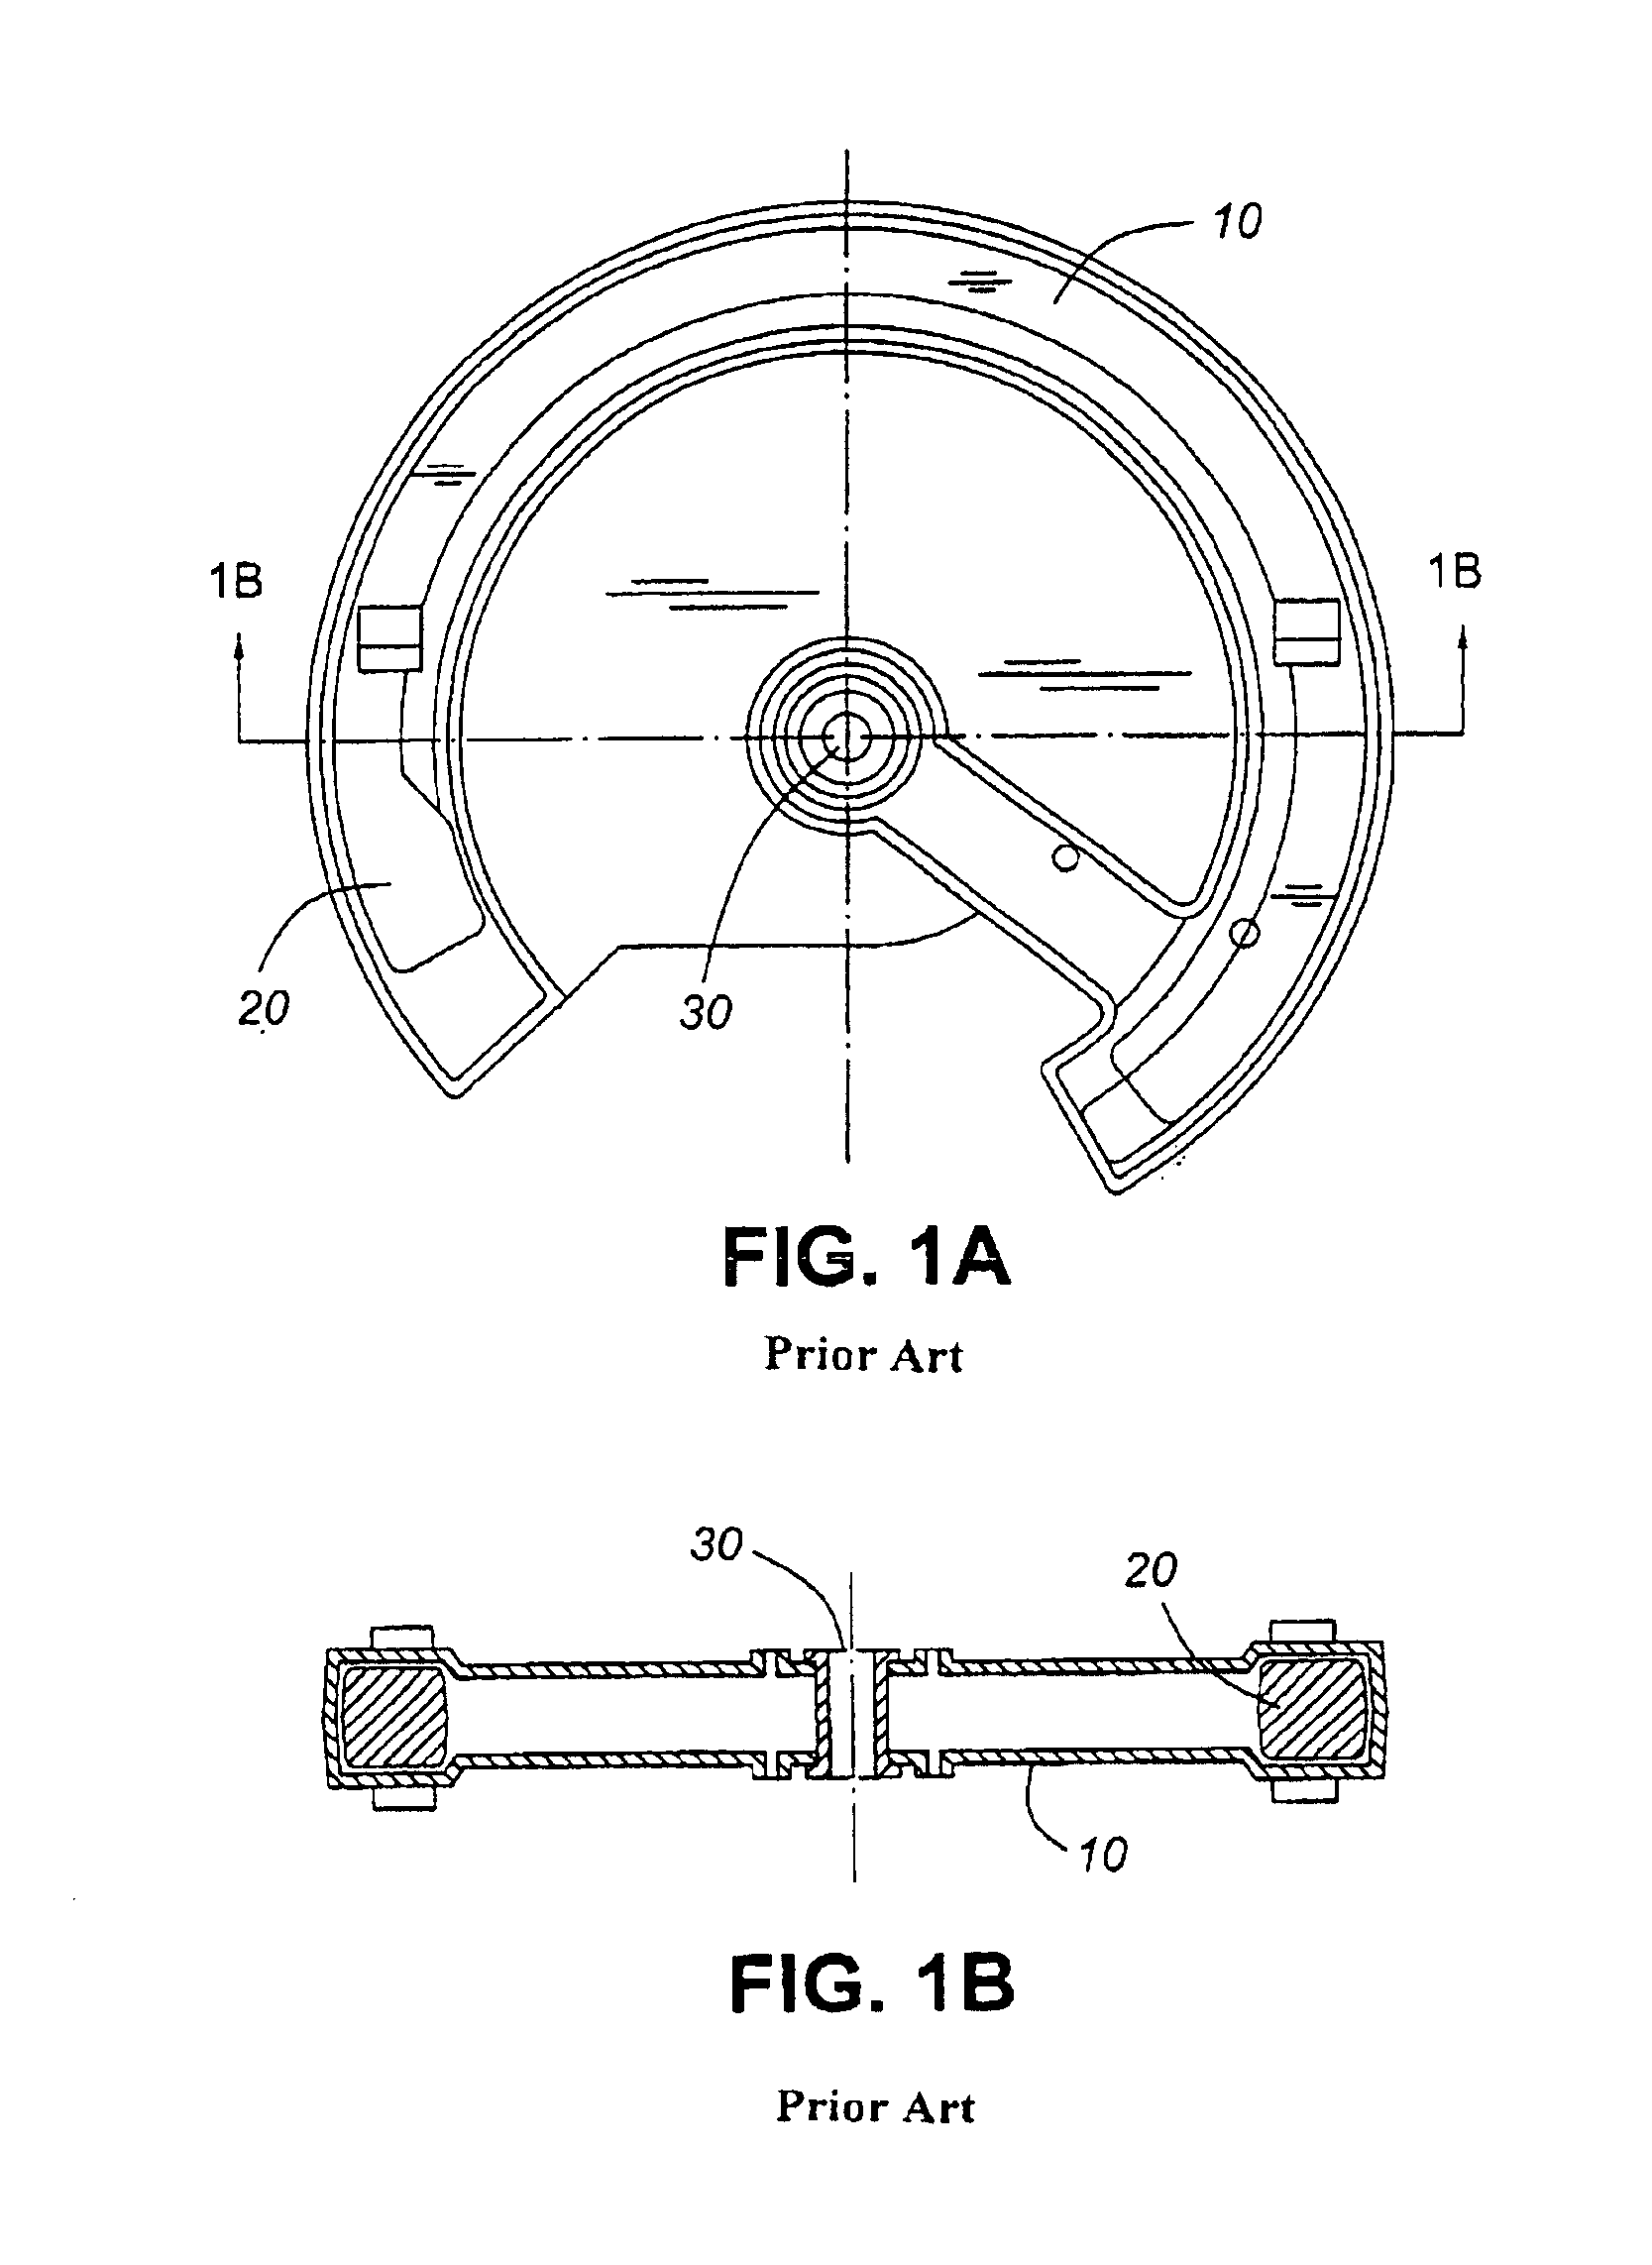 Applicator for an arc-shaped composition stick